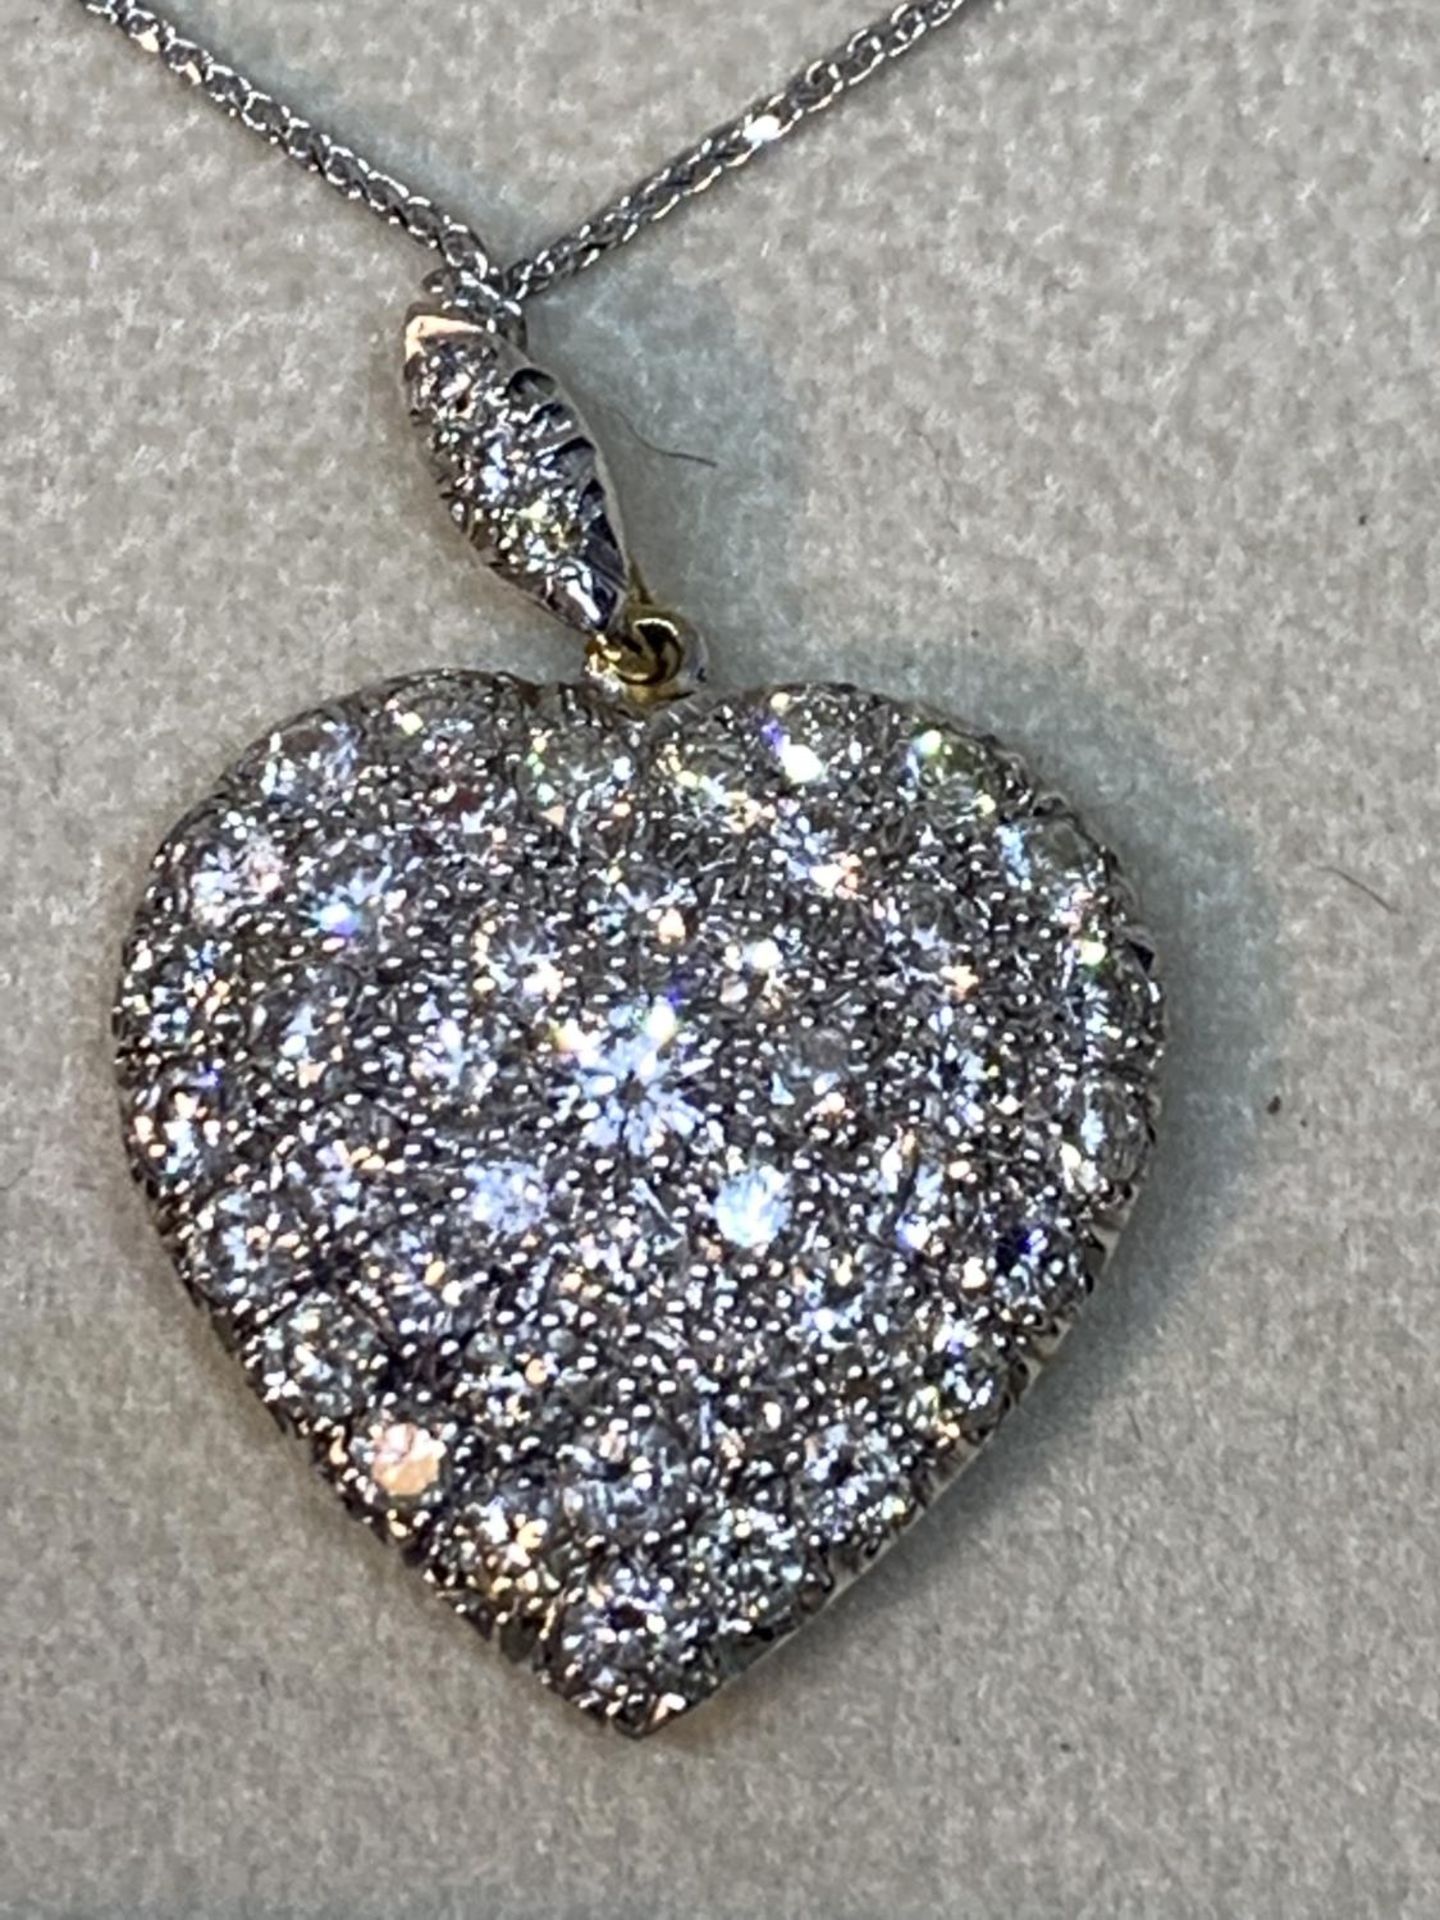 A 15 CARAT WHITE AND YELLOW GOLD LARGE DIAMOND ENCRUSTED HEART PENDANT WITH CHAIN LENGTH 44CM IN A - Image 7 of 8